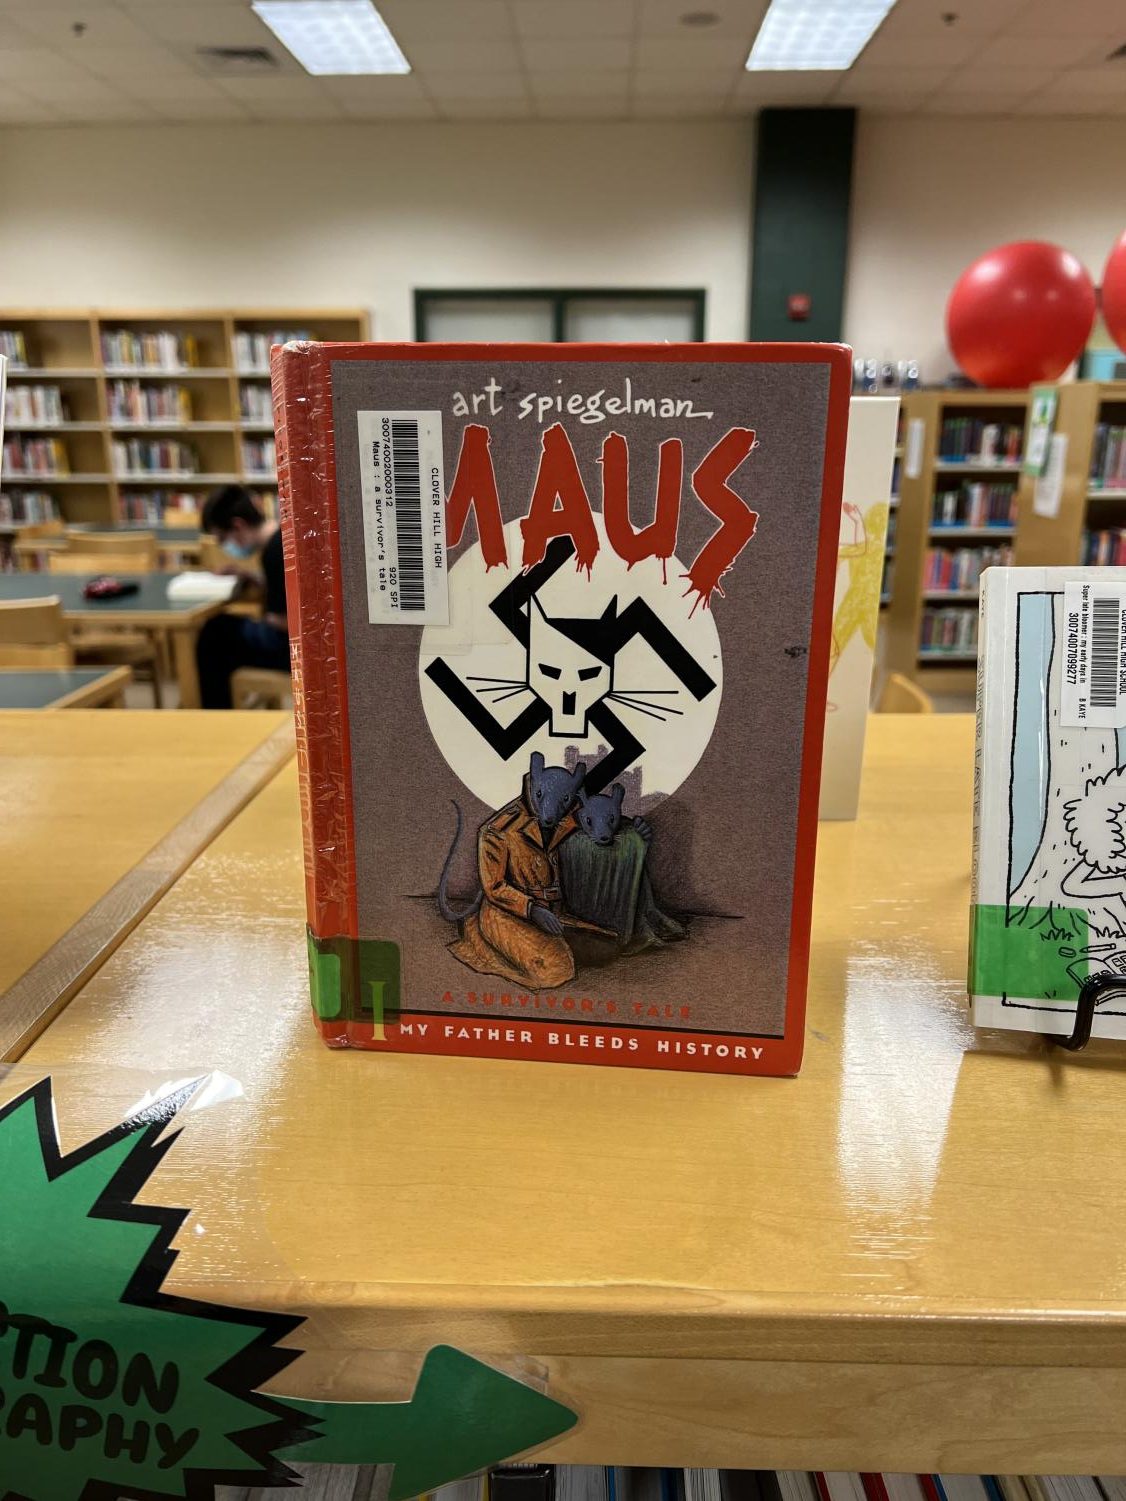 Art Spiegelmans 1980 graphic novel Maus has been a frequent target of those who wish to ban books in public schools.